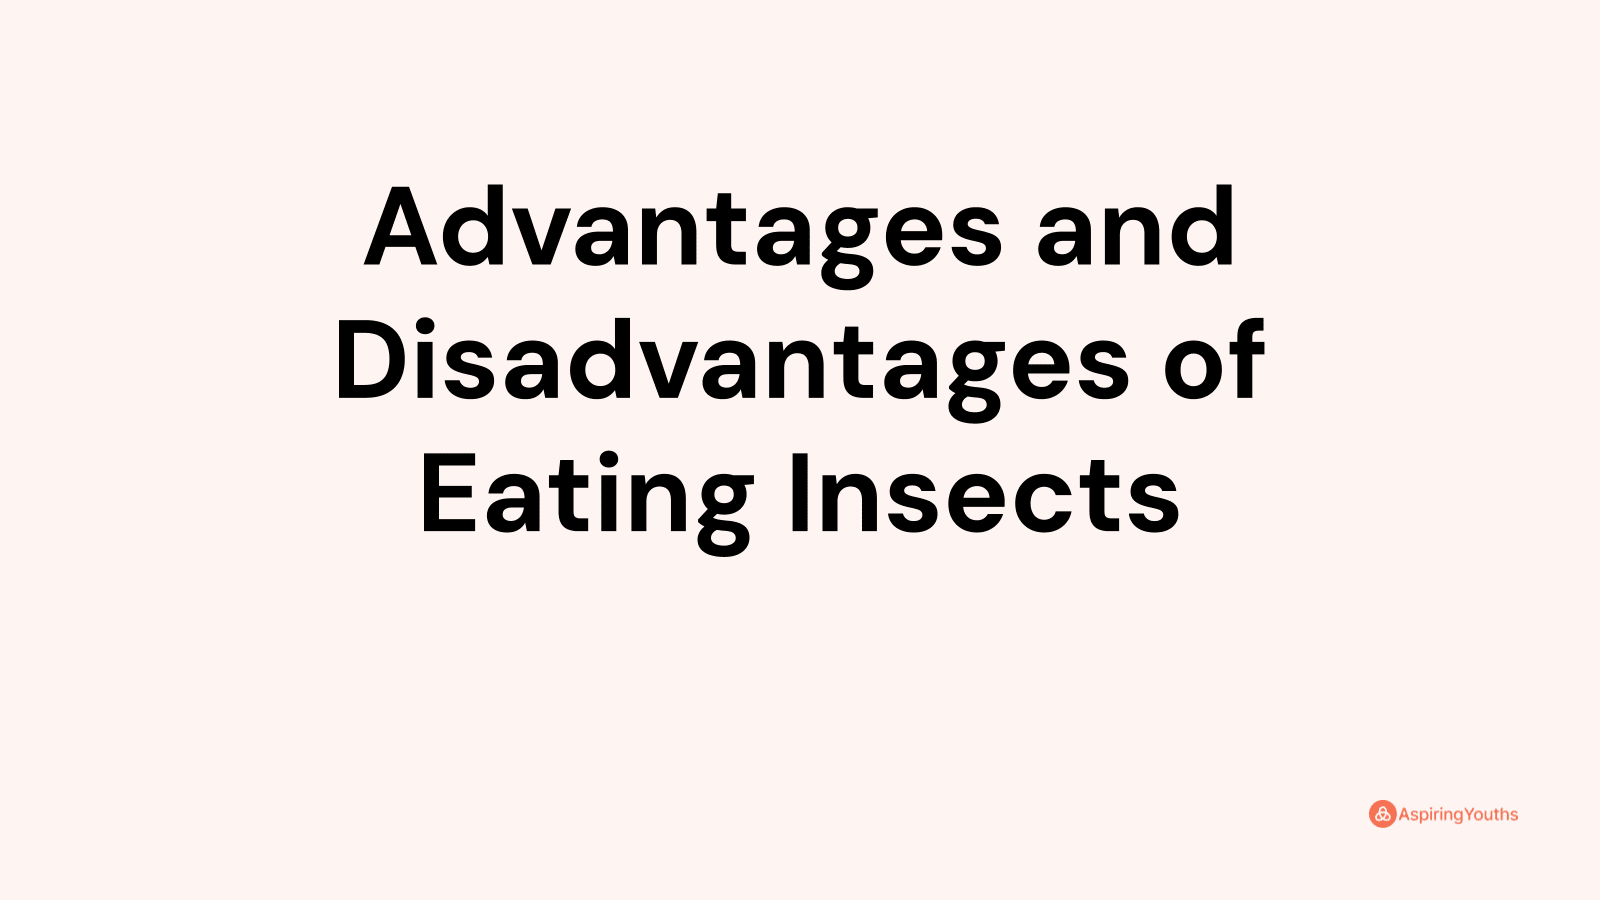 Advantages and disadvantages of Eating Insects